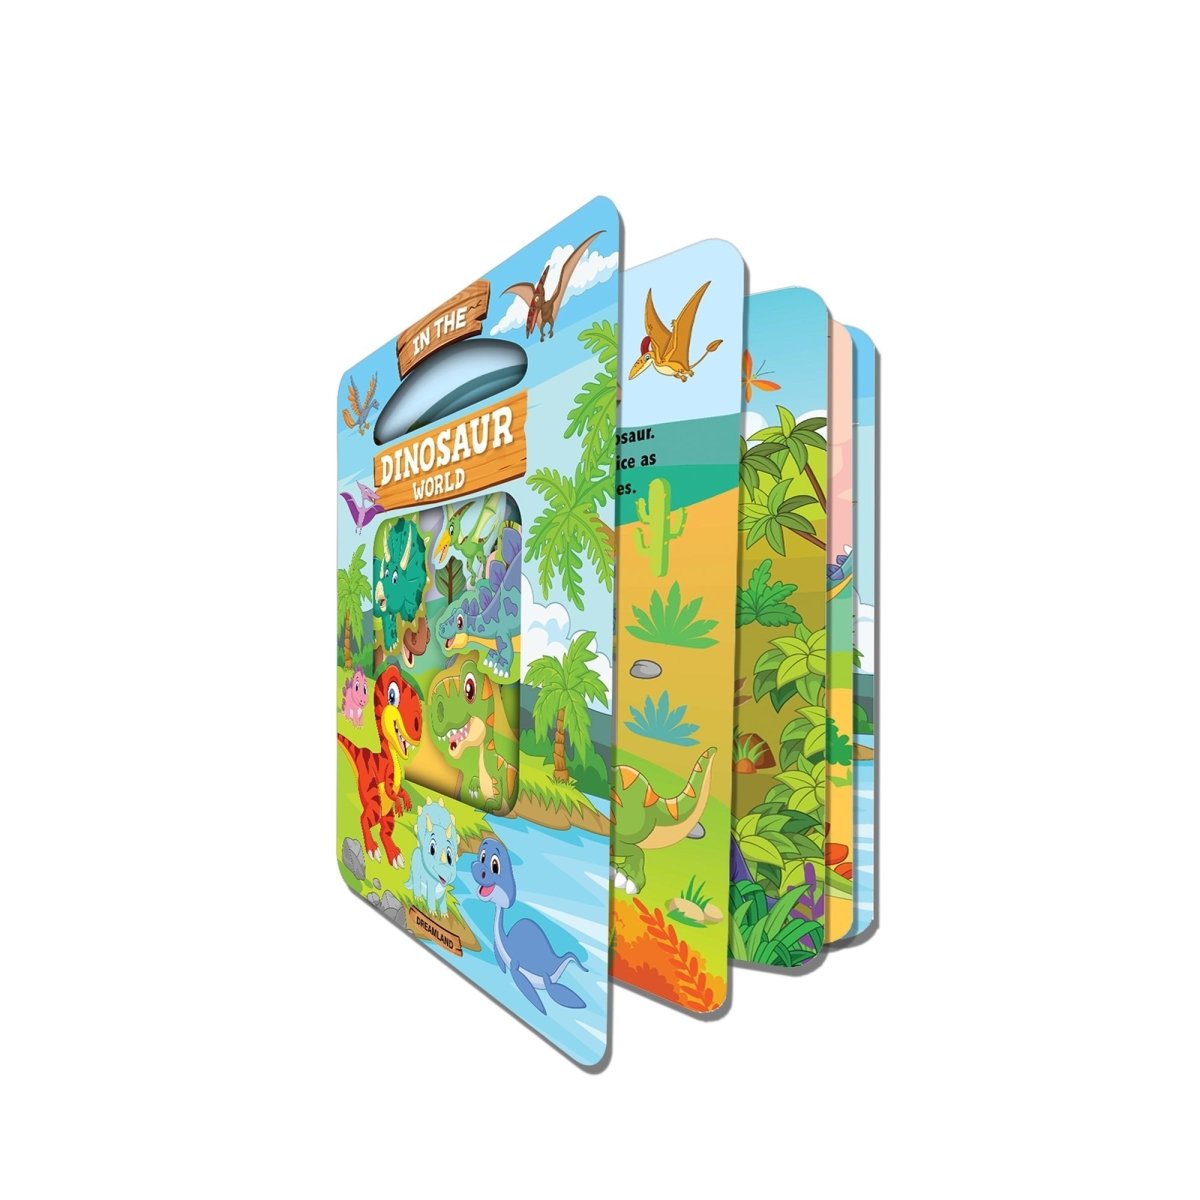 Dreamland Publications Die Cut Window Board Book- In the Dinosaurs World Picture Book - 9788196034849